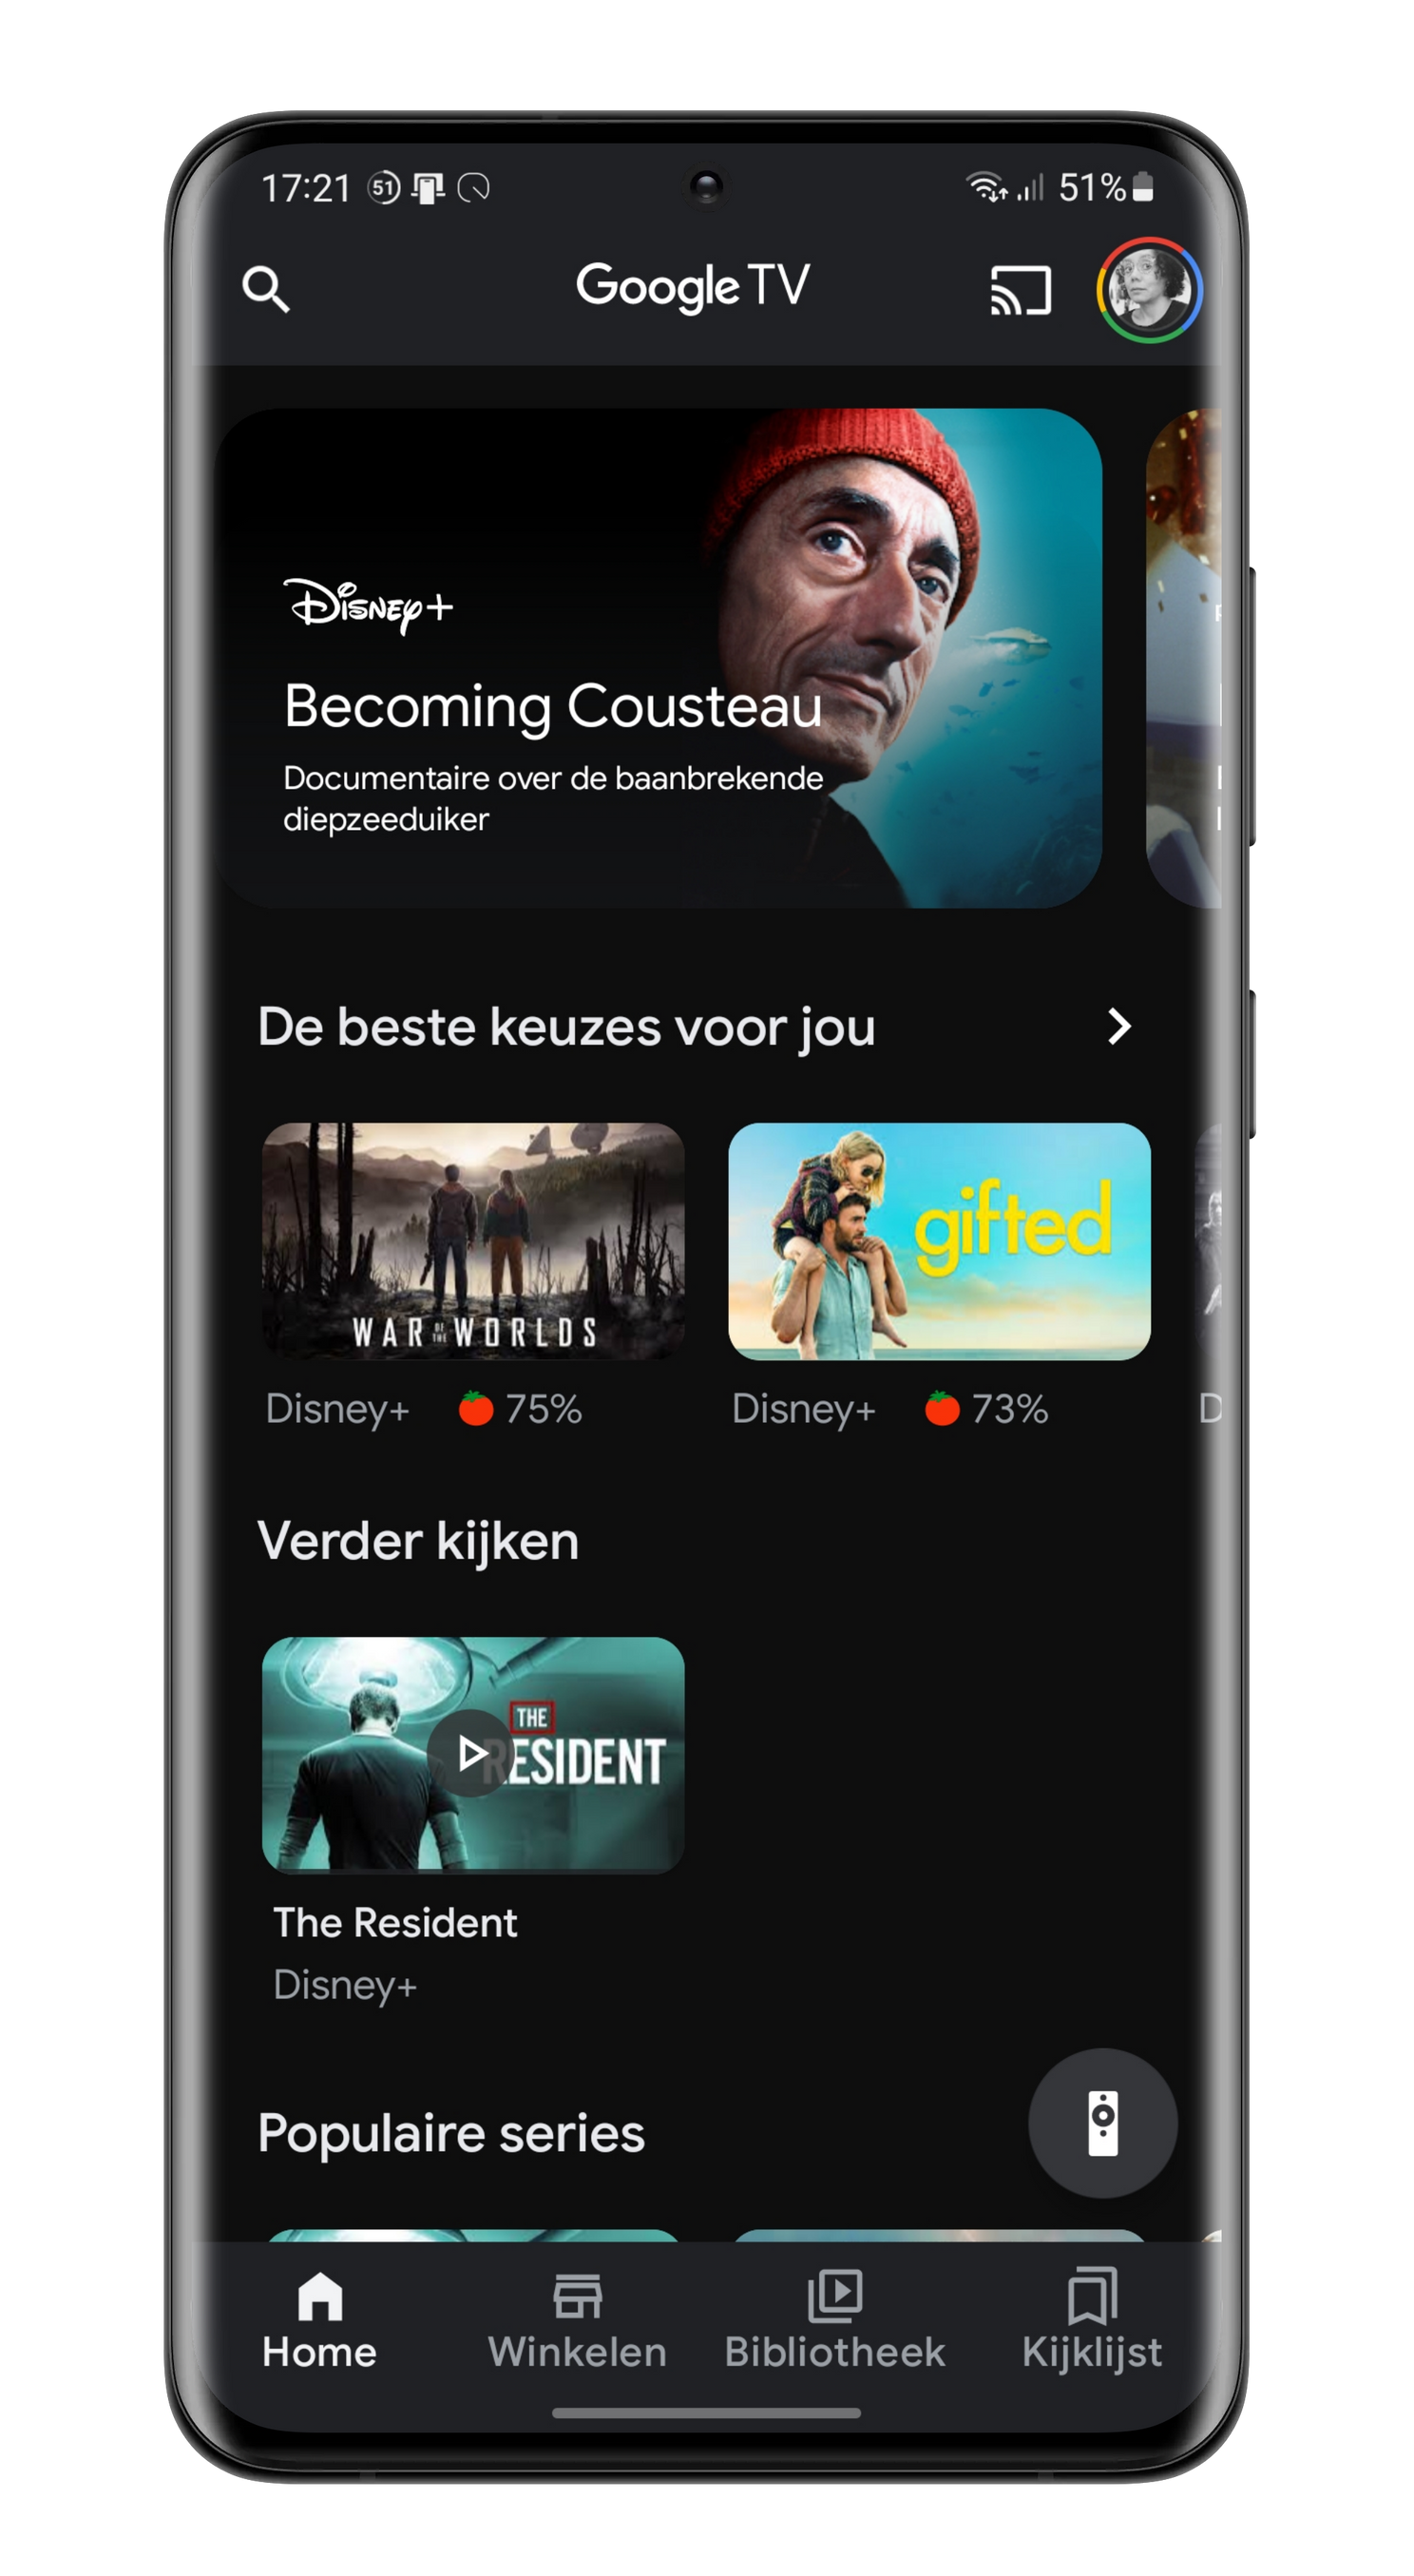 The Google TV app is available in the Netherlands: that will change for you